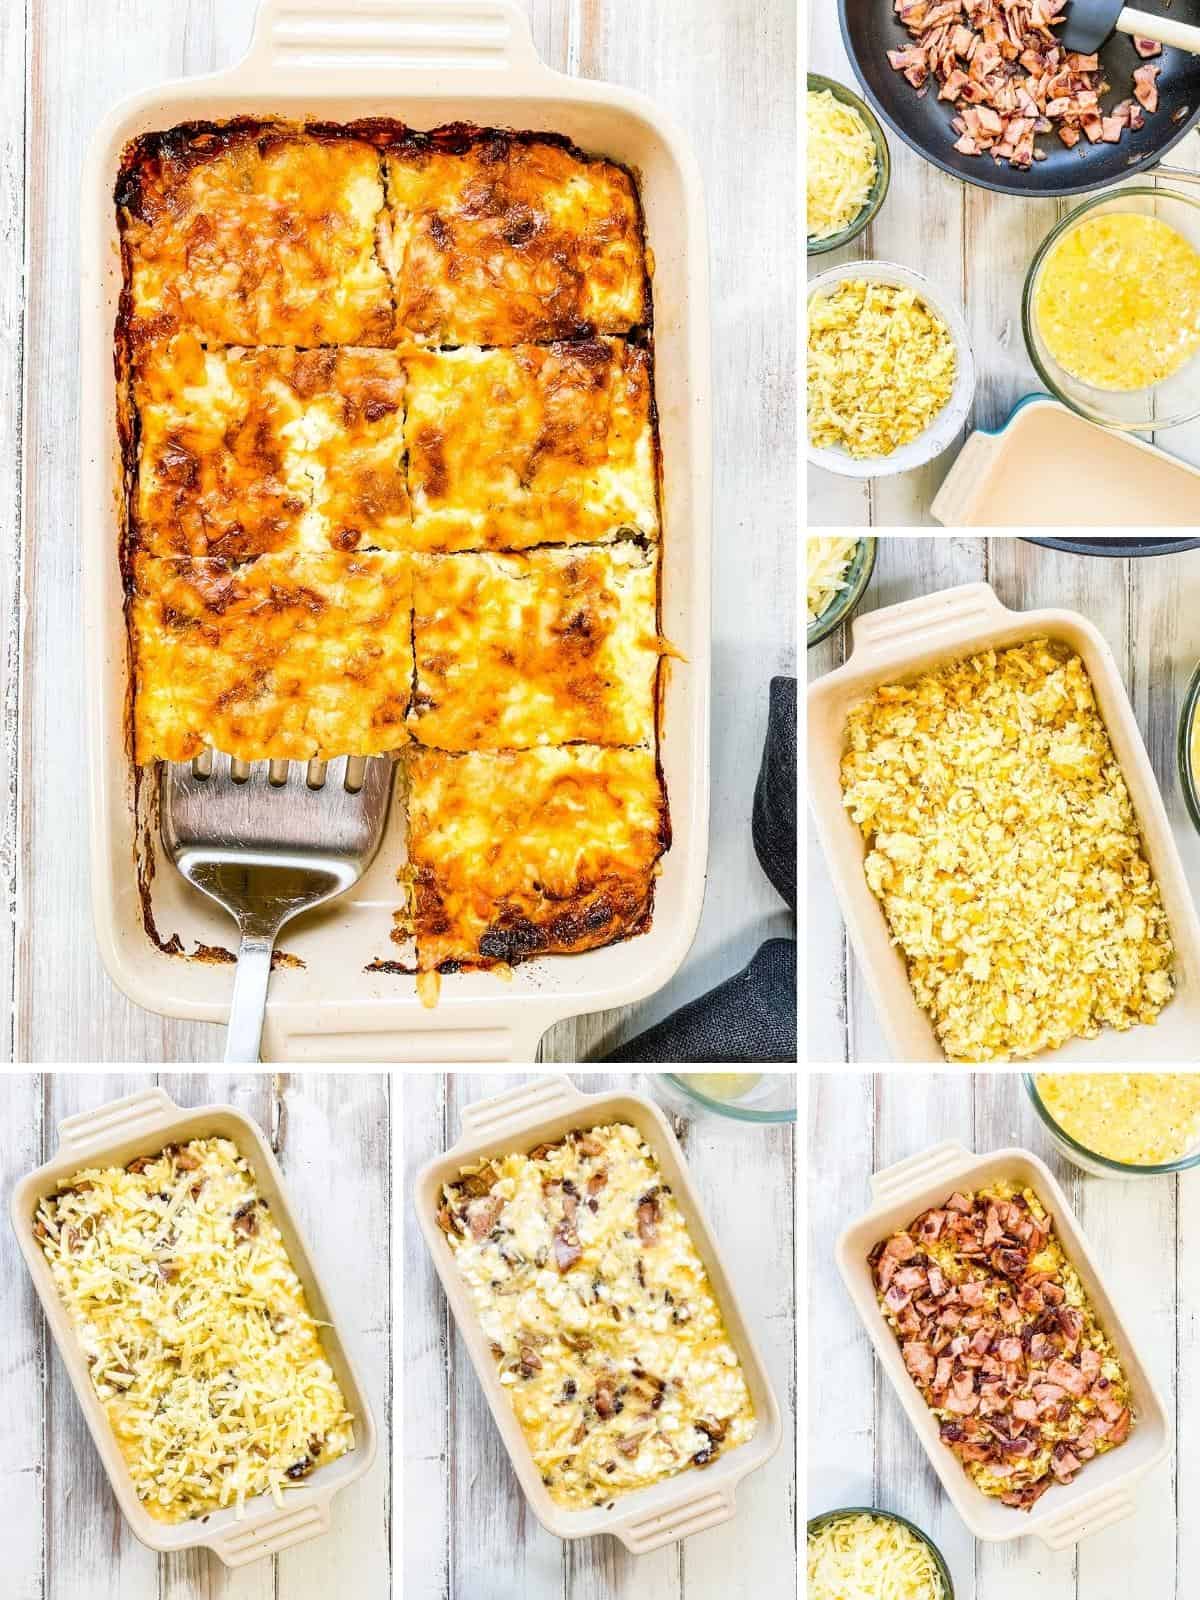 Six photos showing the process of making a breakfast casserole.